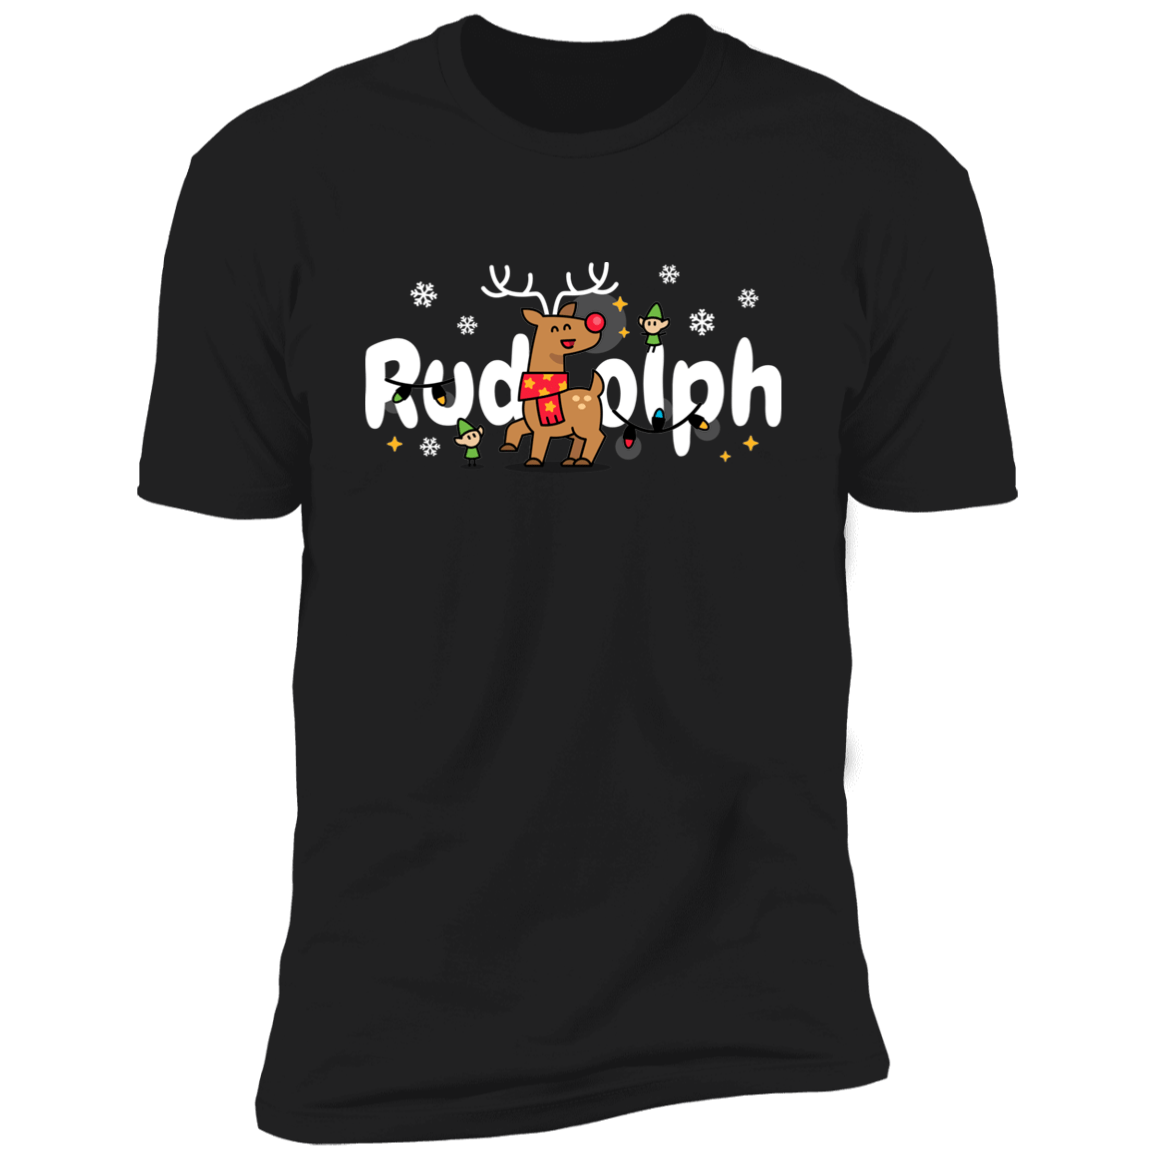 Most Likely To try To Ride Rudolph & Rudolph Black Deluxe Unisex Tees